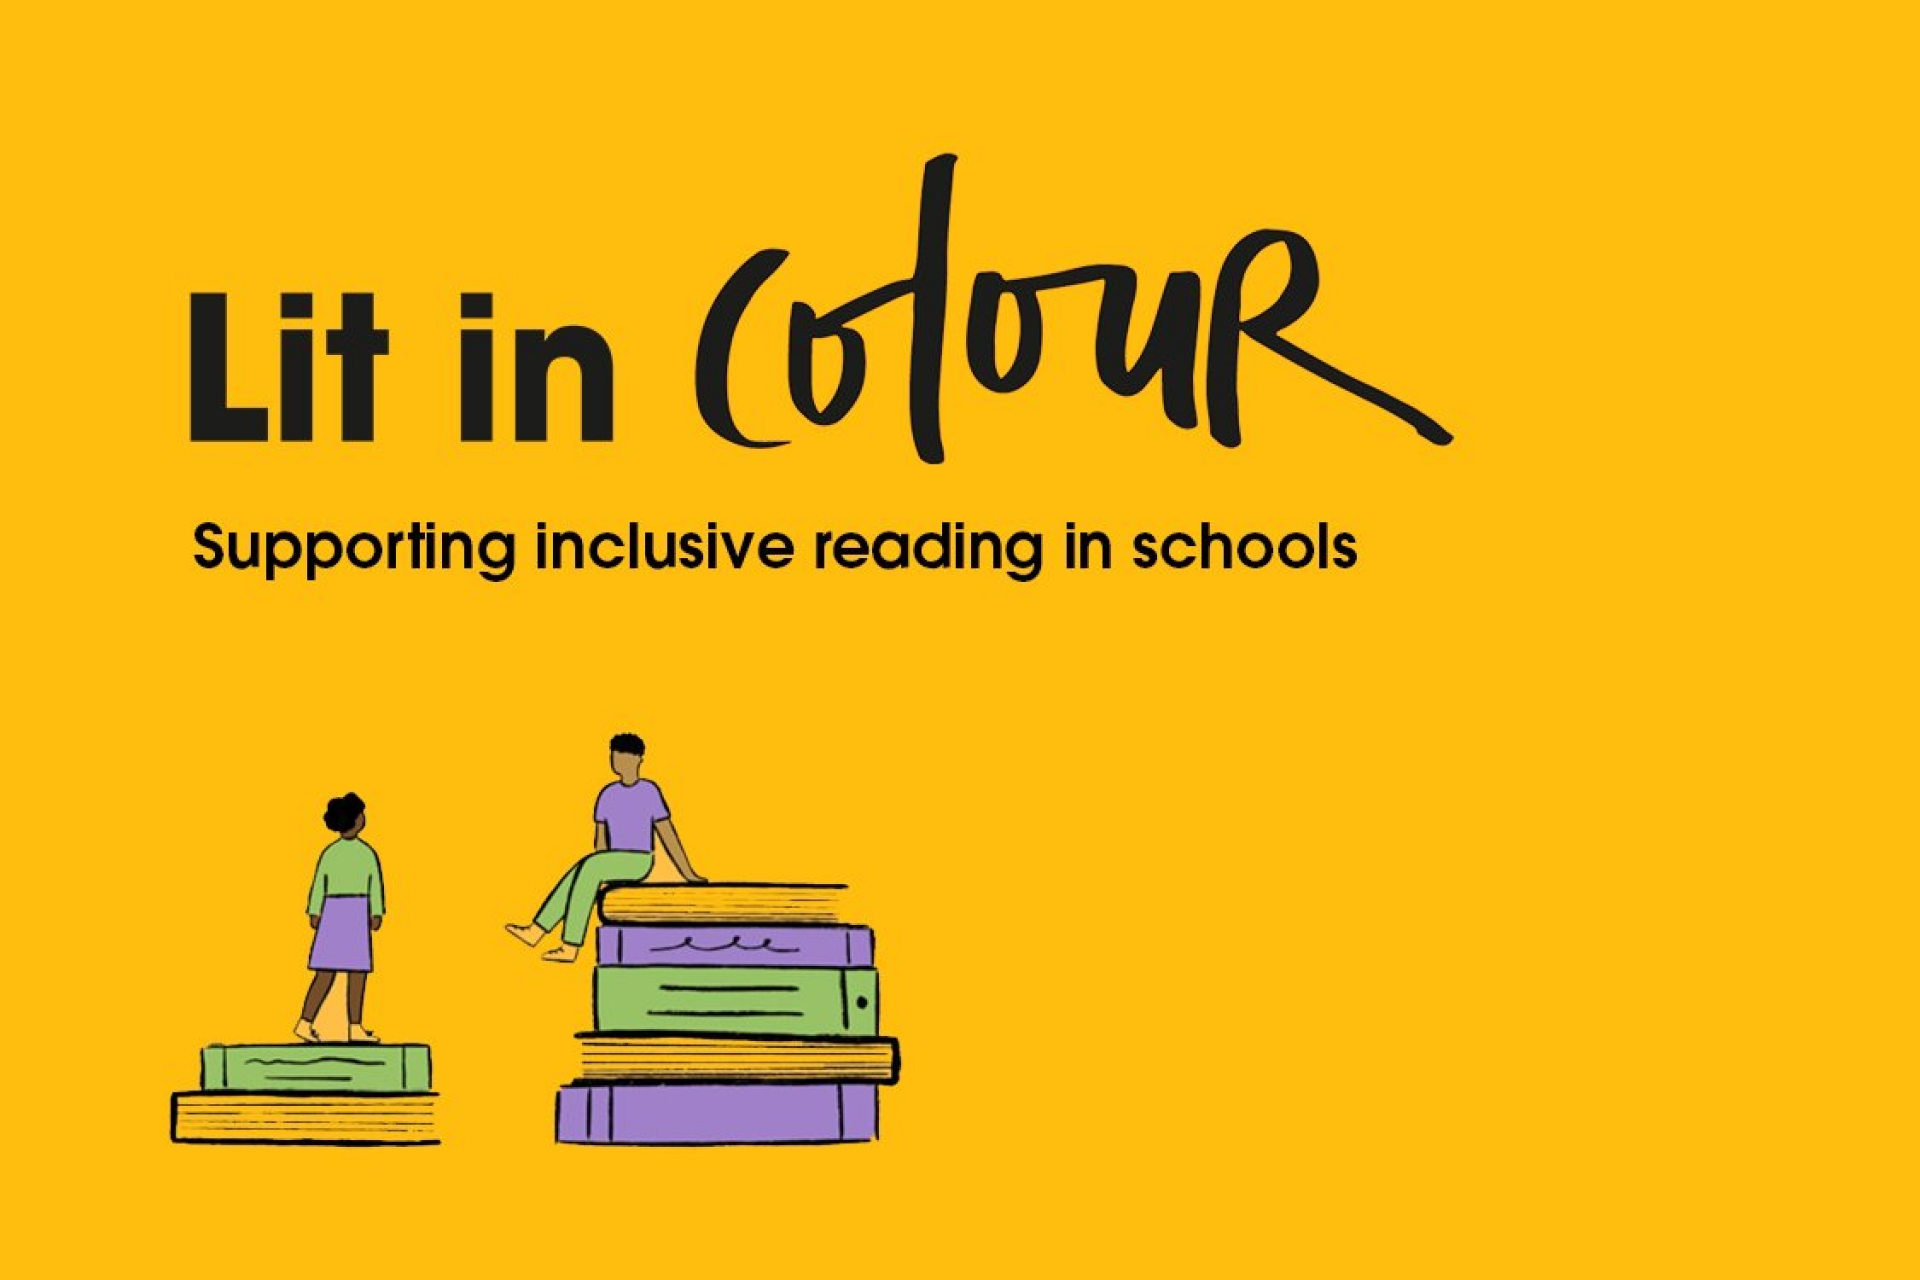 Lit in Colour moves into second year as research shows teachers want access to more diverse and representative texts